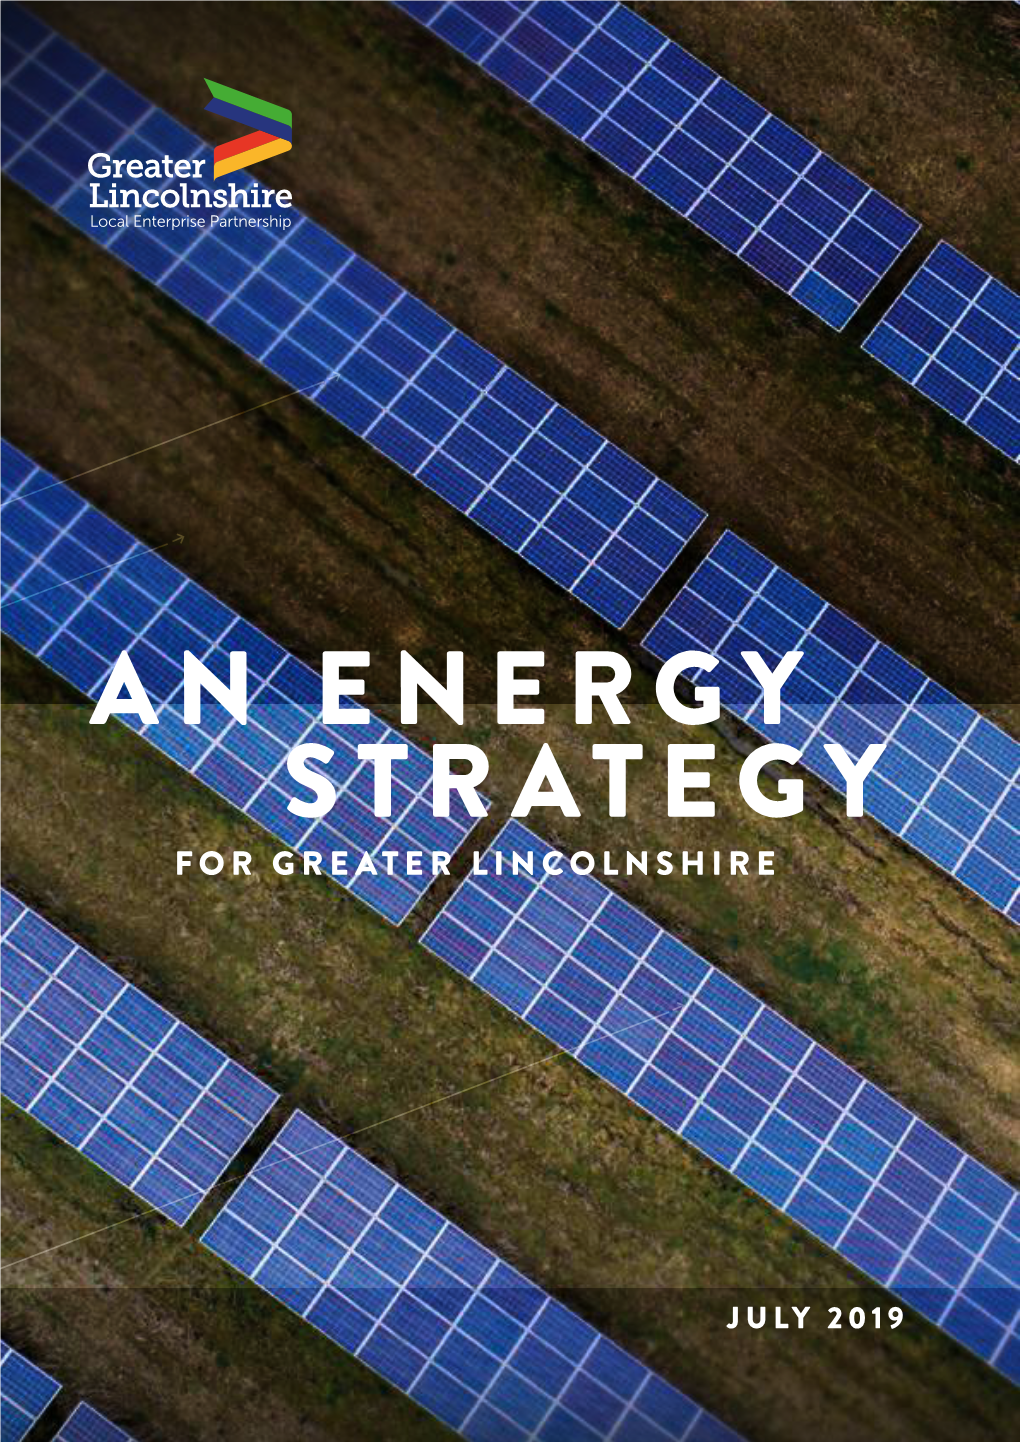 An Energy Strategy for Greater Lincolnshire